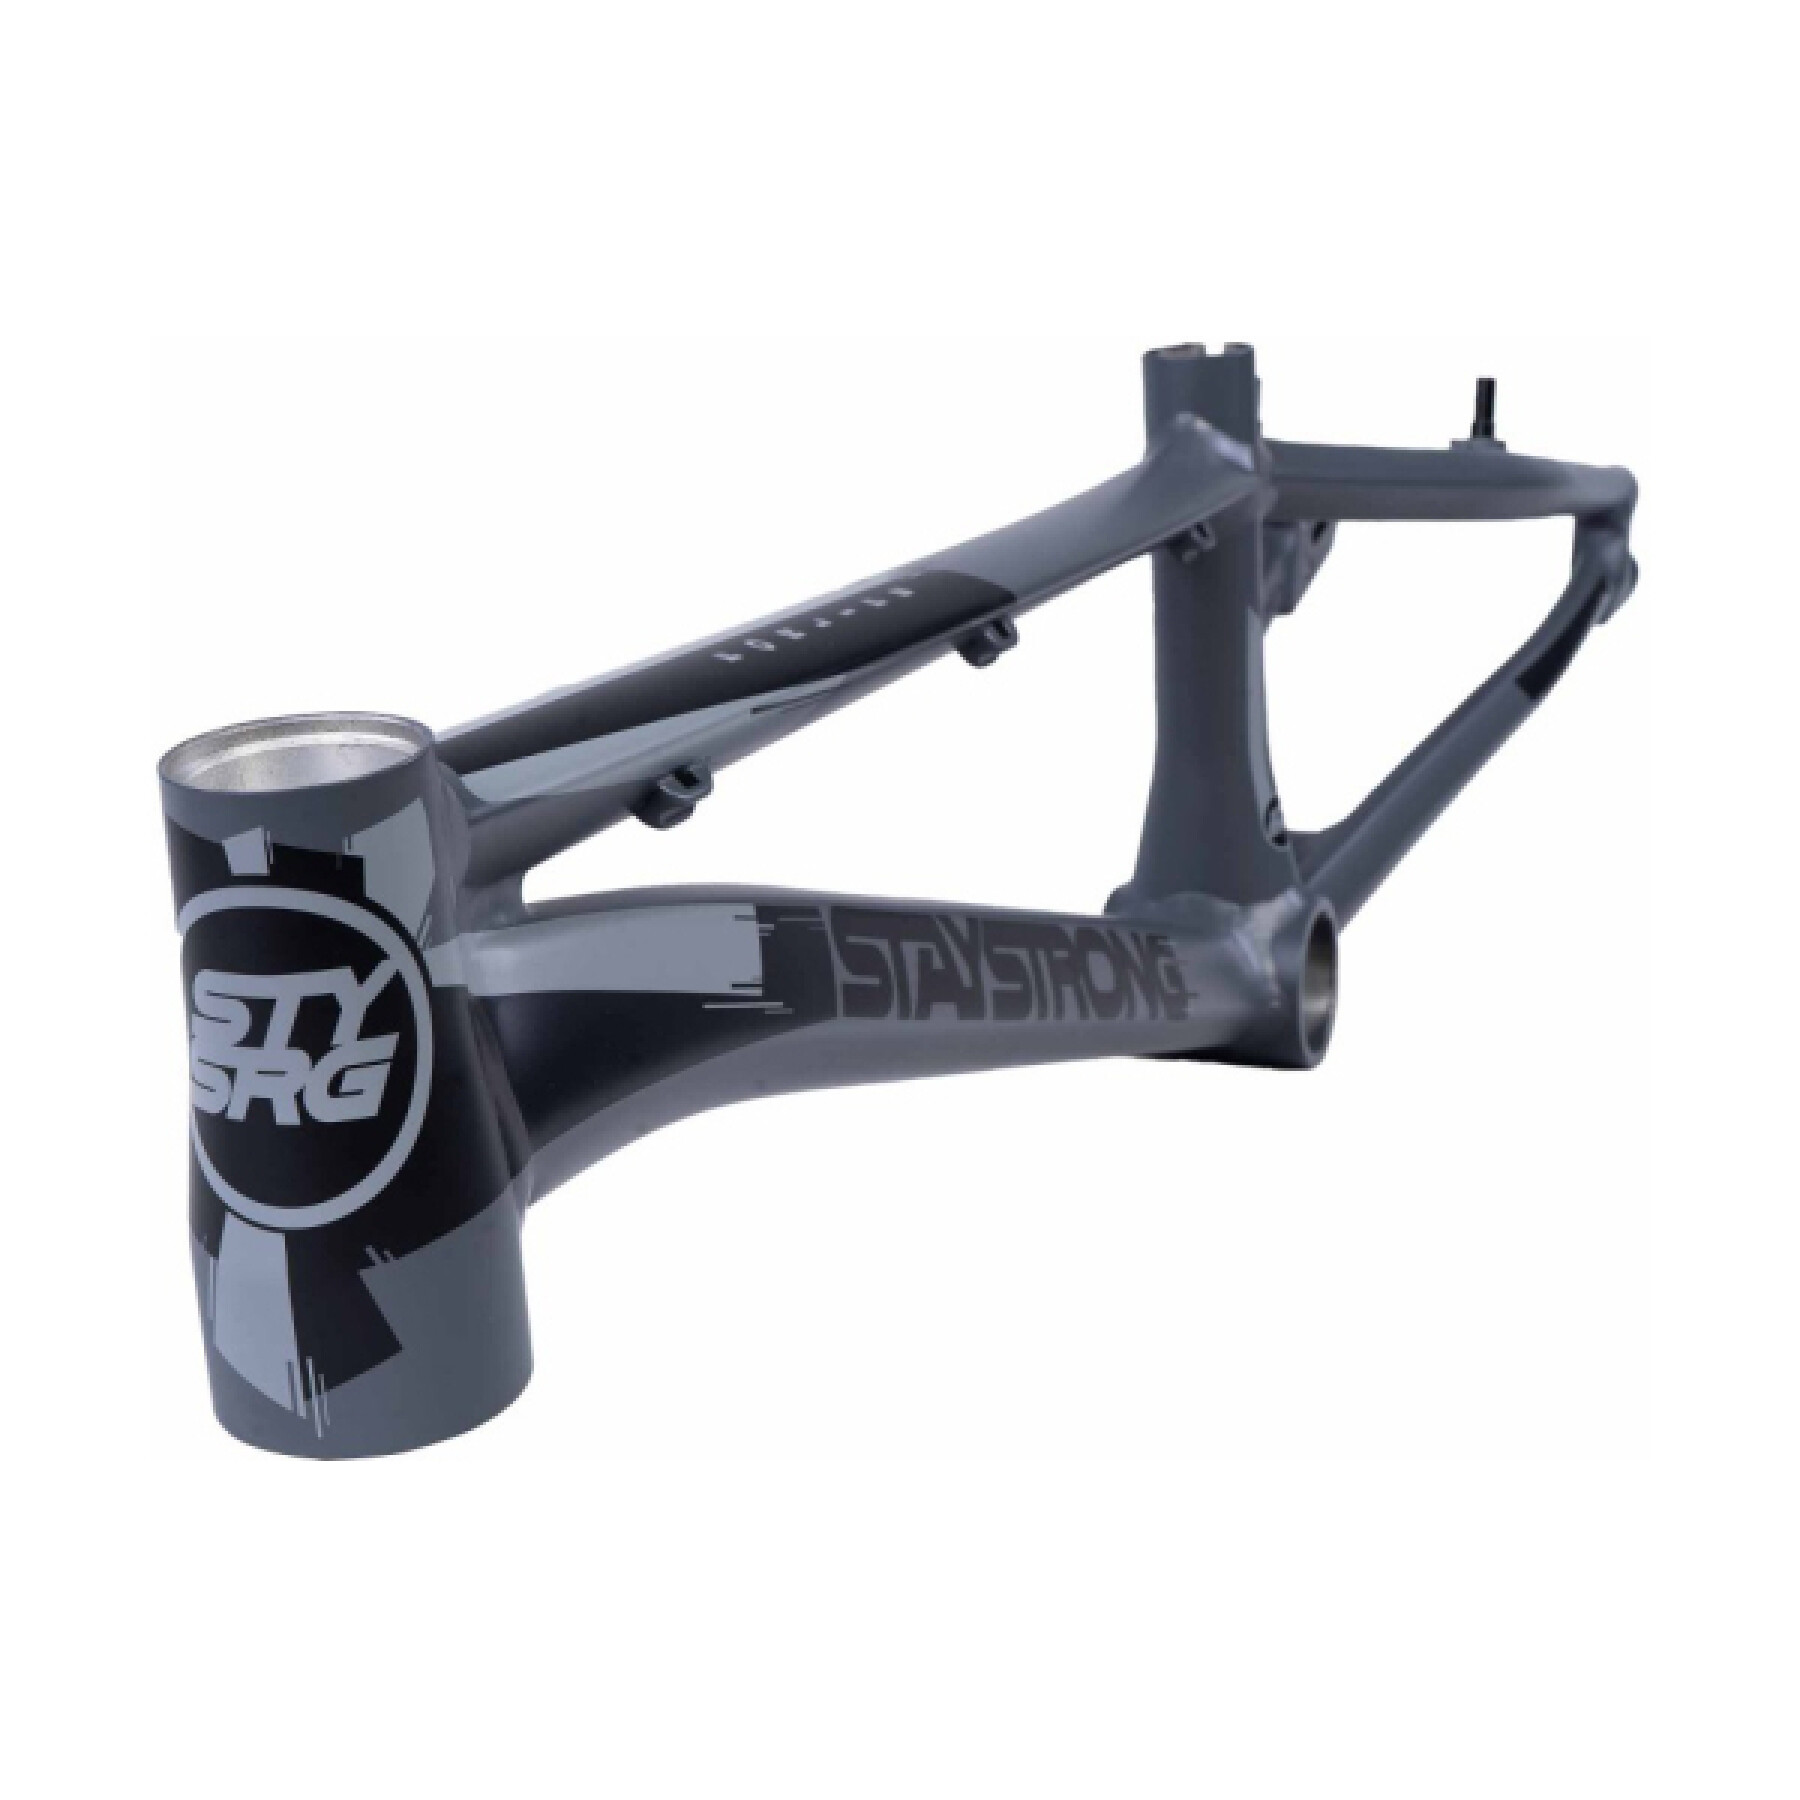 Cadre BMX Stay Strong For Life V3 - Pro